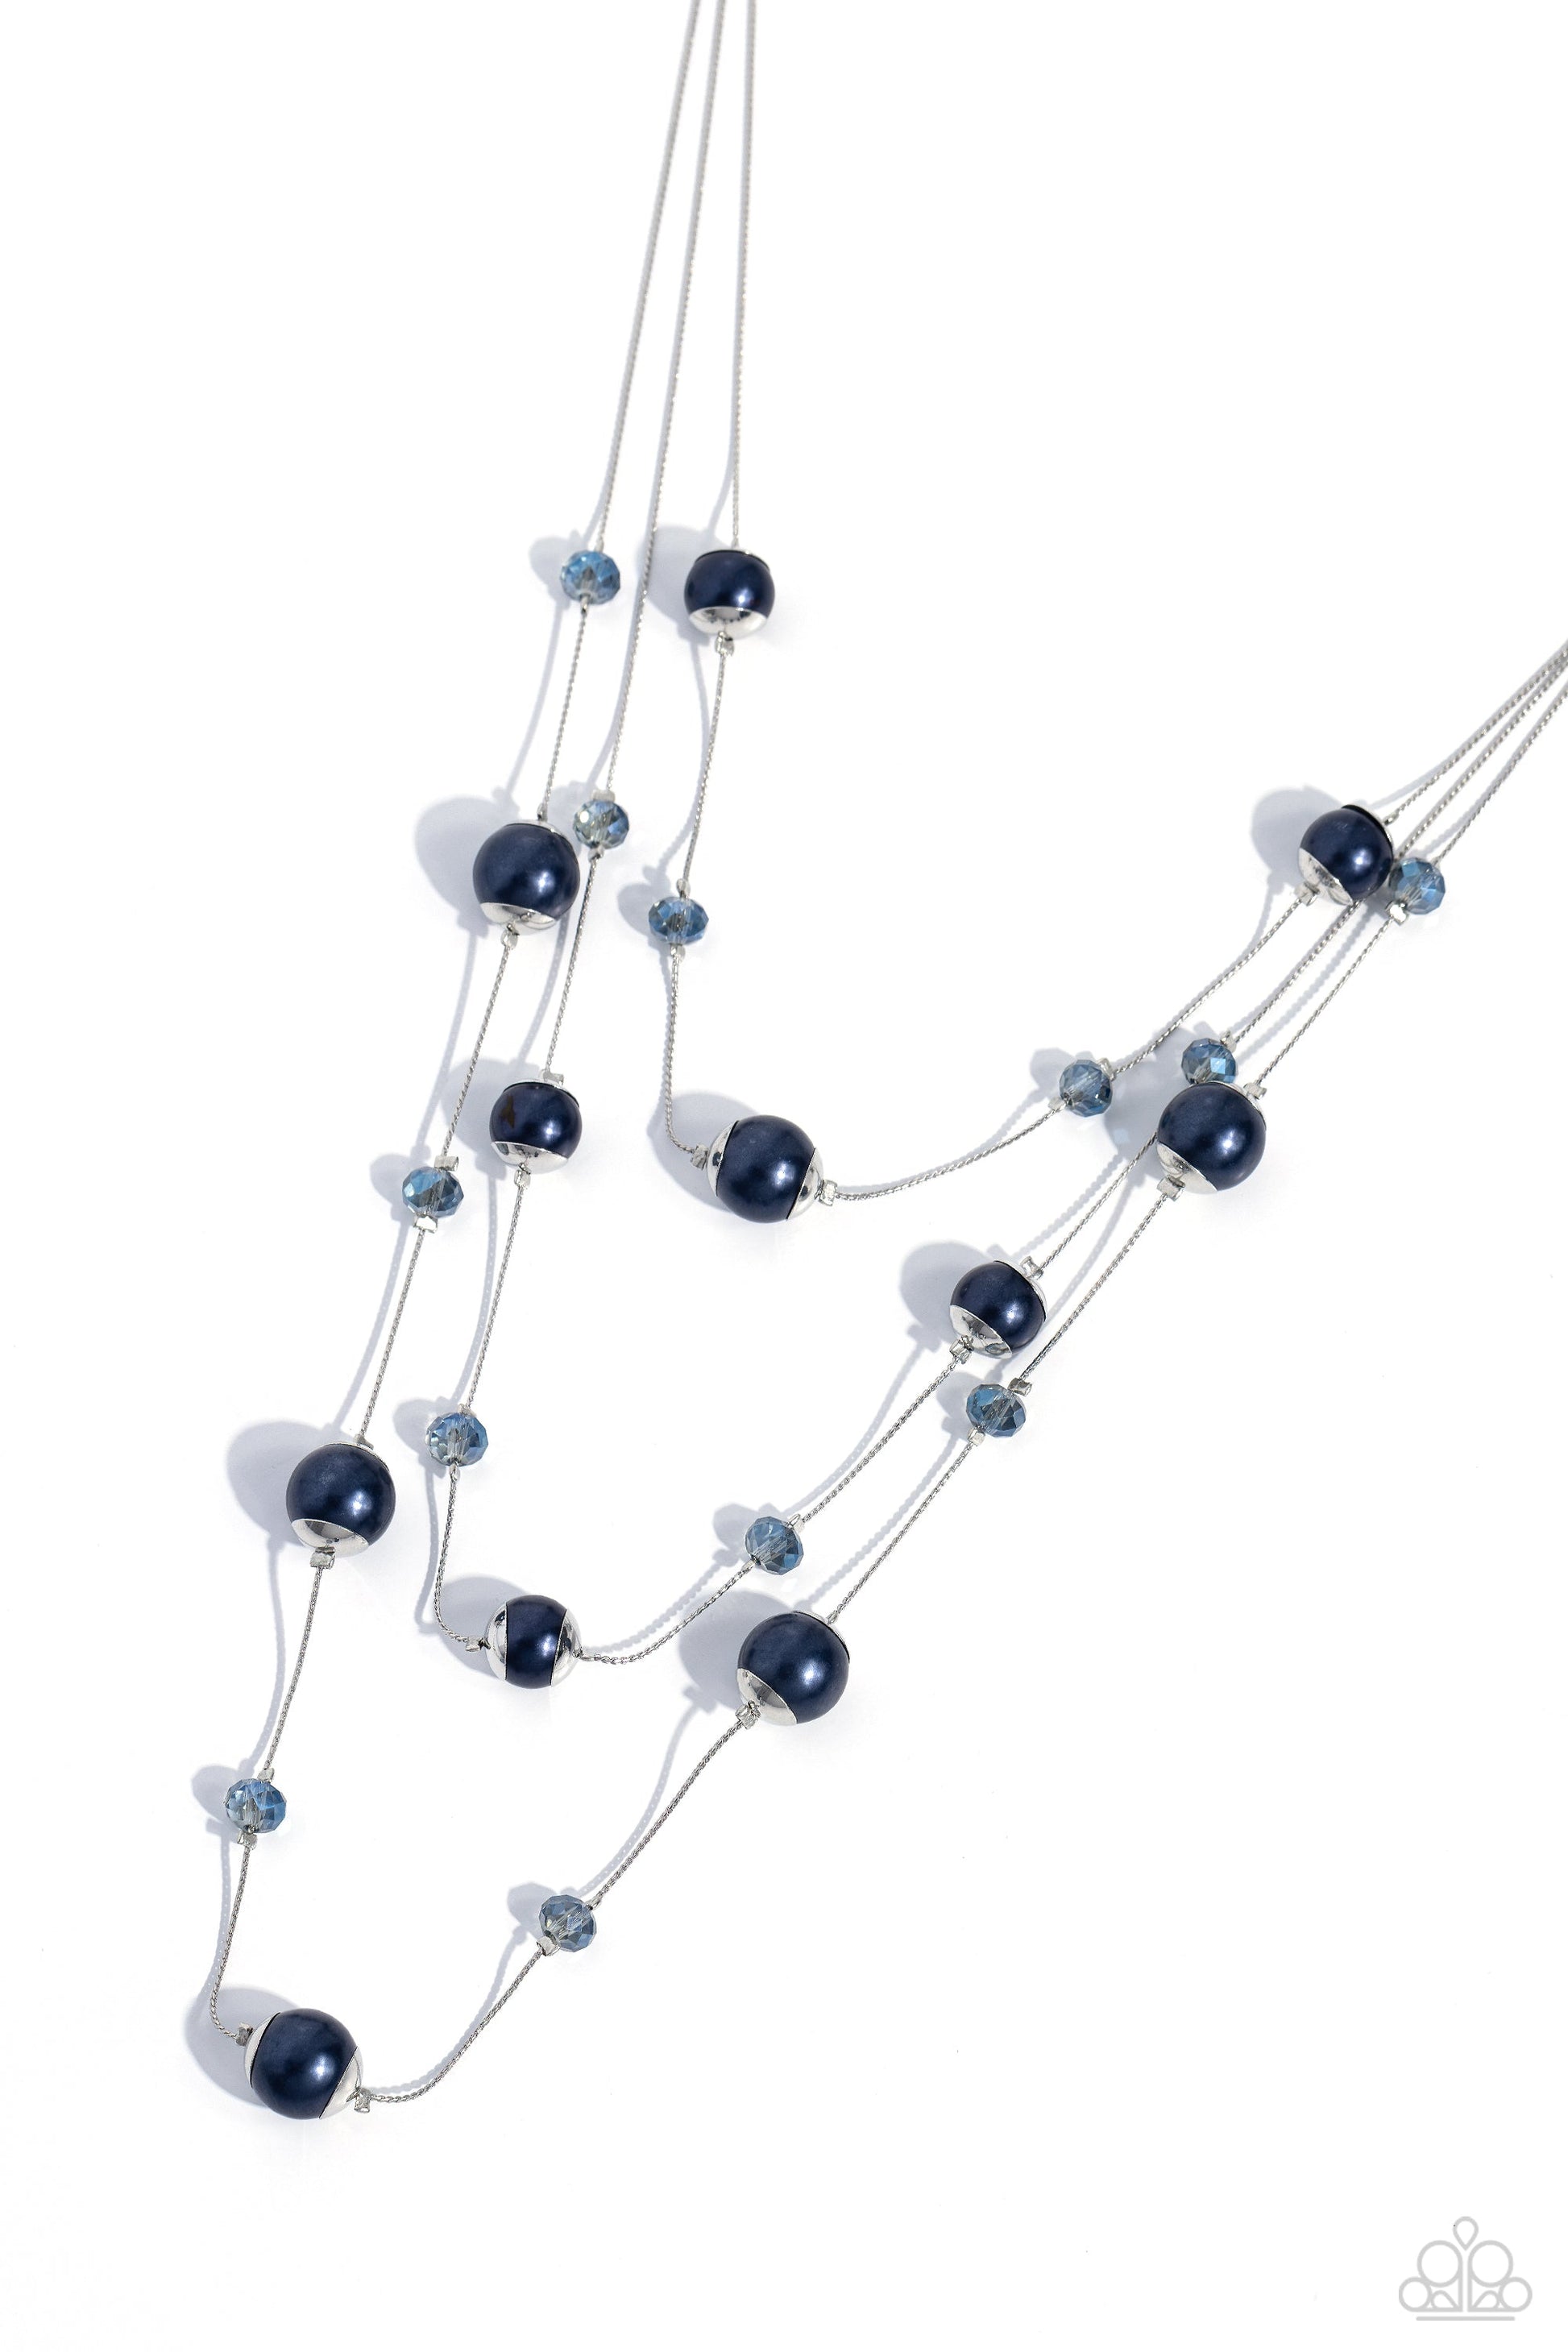 Glistening Gamut - Blue and Silver Necklace - Paparazzi Accessories - Three strands of lengthened silver chains are adorned with soft navy pearls in silver cap fittings and glassy blue reflective beads for an eye-catching statement down the chest.